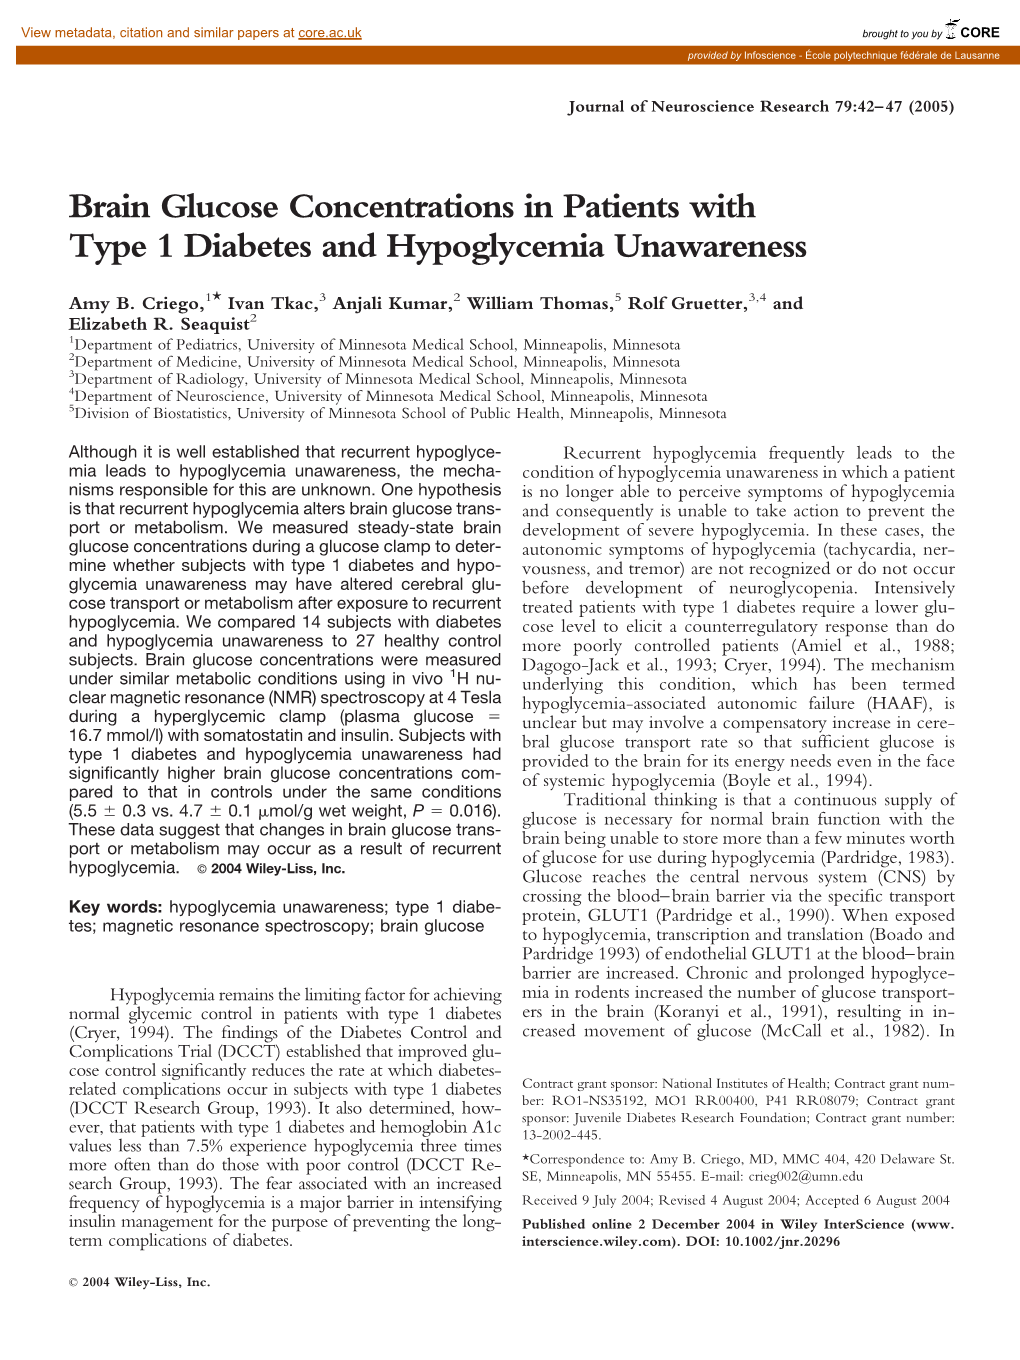 Brain Glucose Concentrations in Patients with Type 1 Diabetes and Hypoglycemia Unawareness